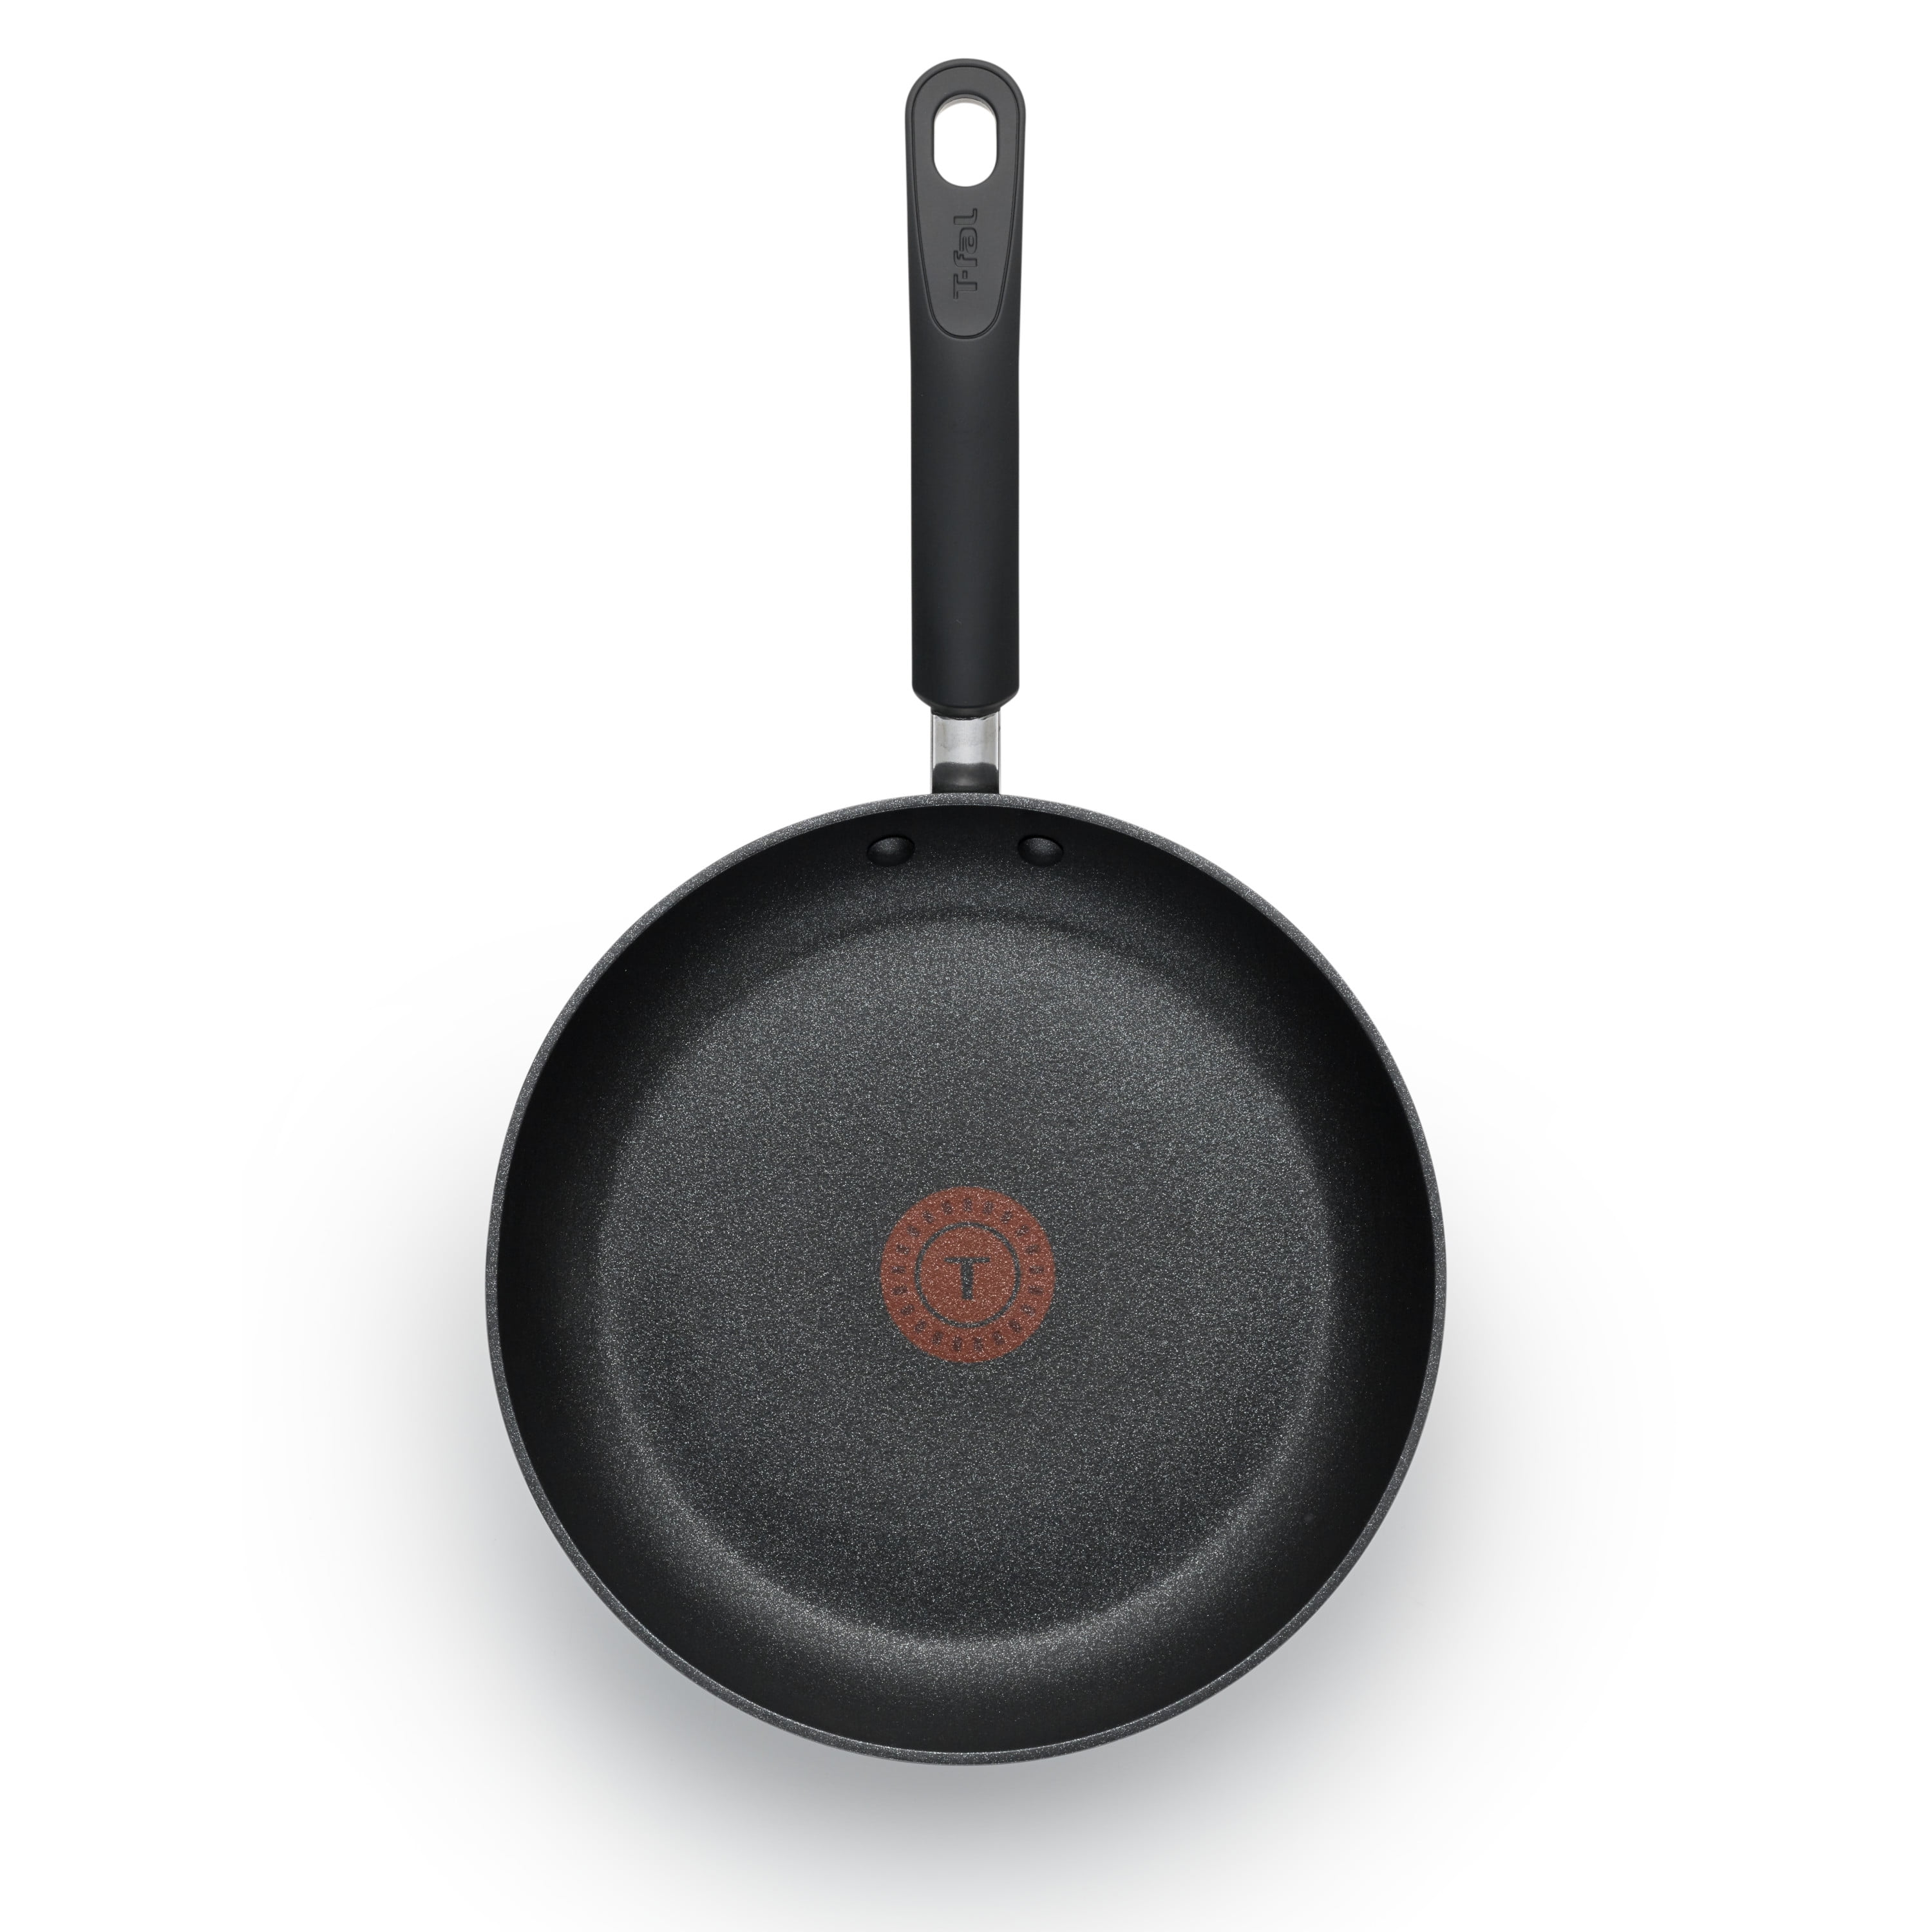 T-fal Advanced Nonstick Fry Pan 8 Inch Oven Safe 350F Cookware, Pots and  Pans, Dishwasher Safe Black